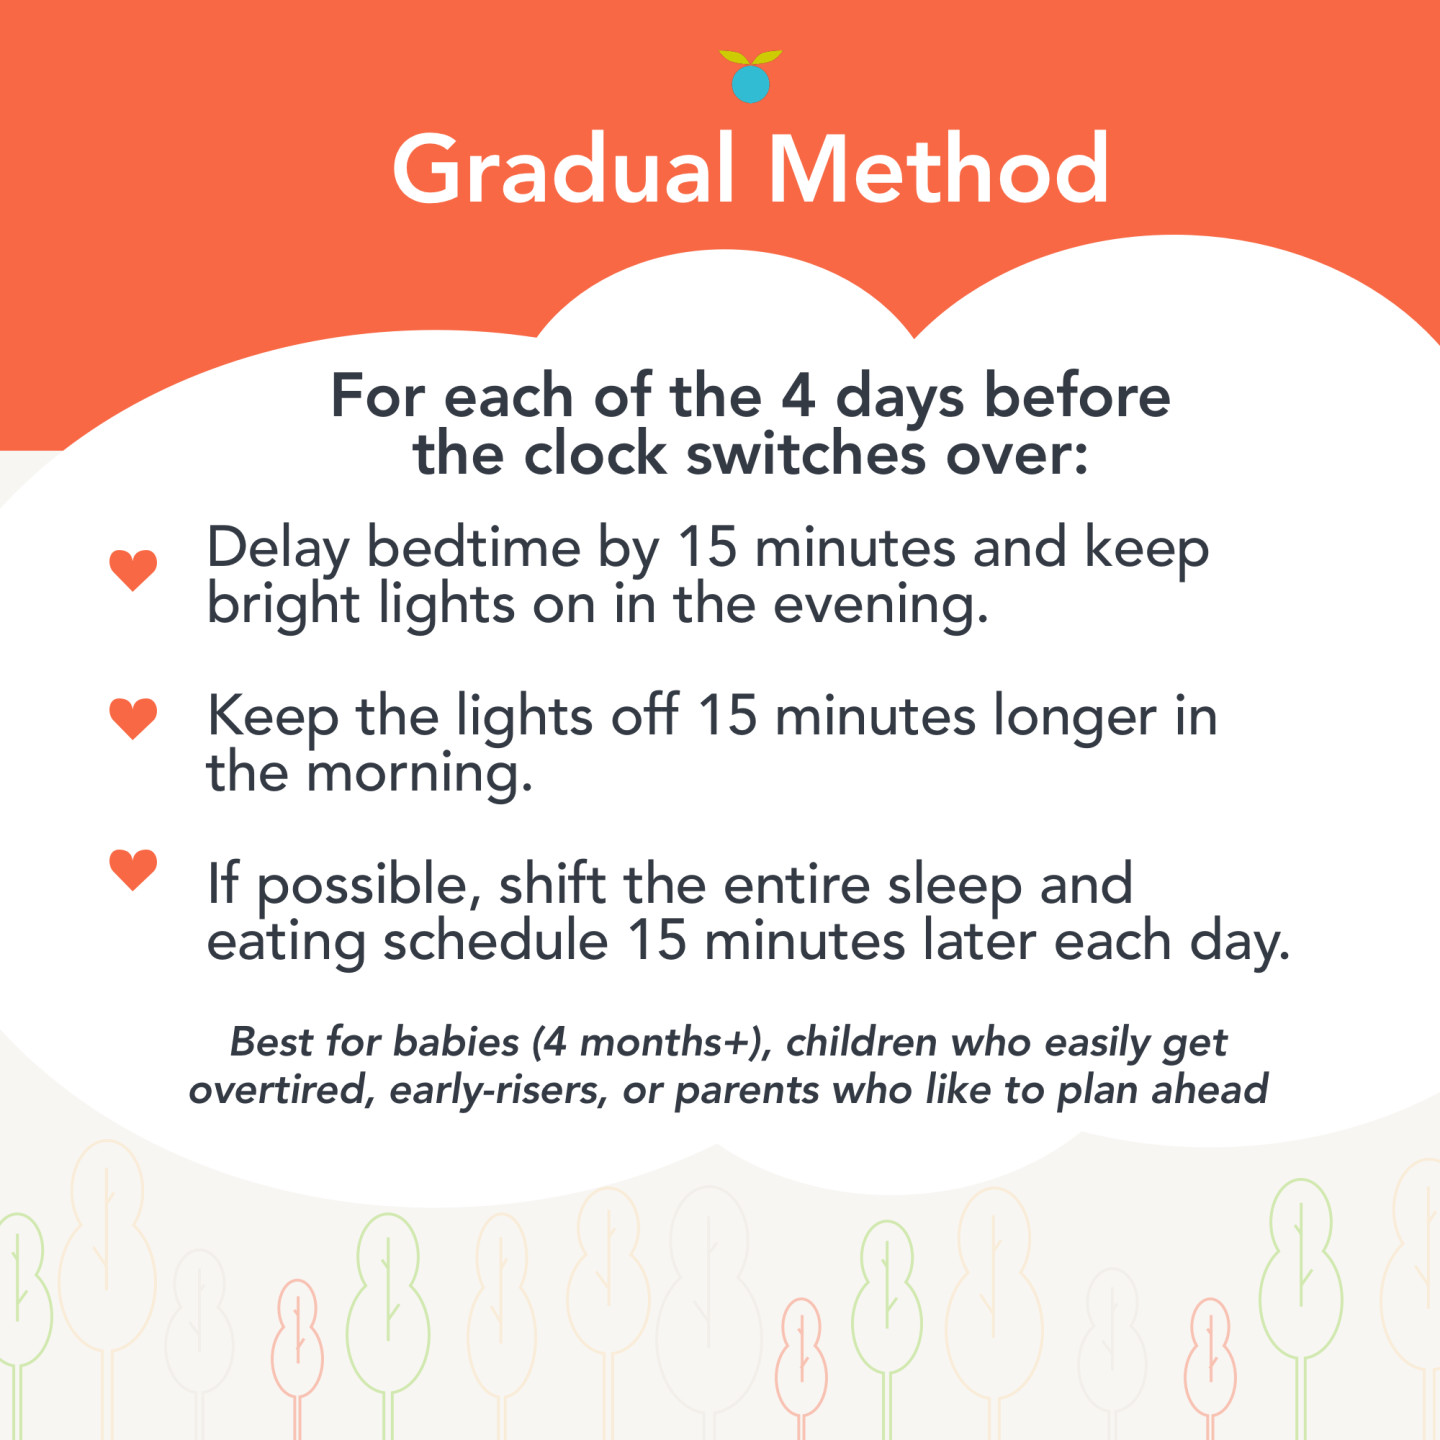 The Gradual Method of schedule shifting in preparation of Fall back daylight saving time by Huckleberry.